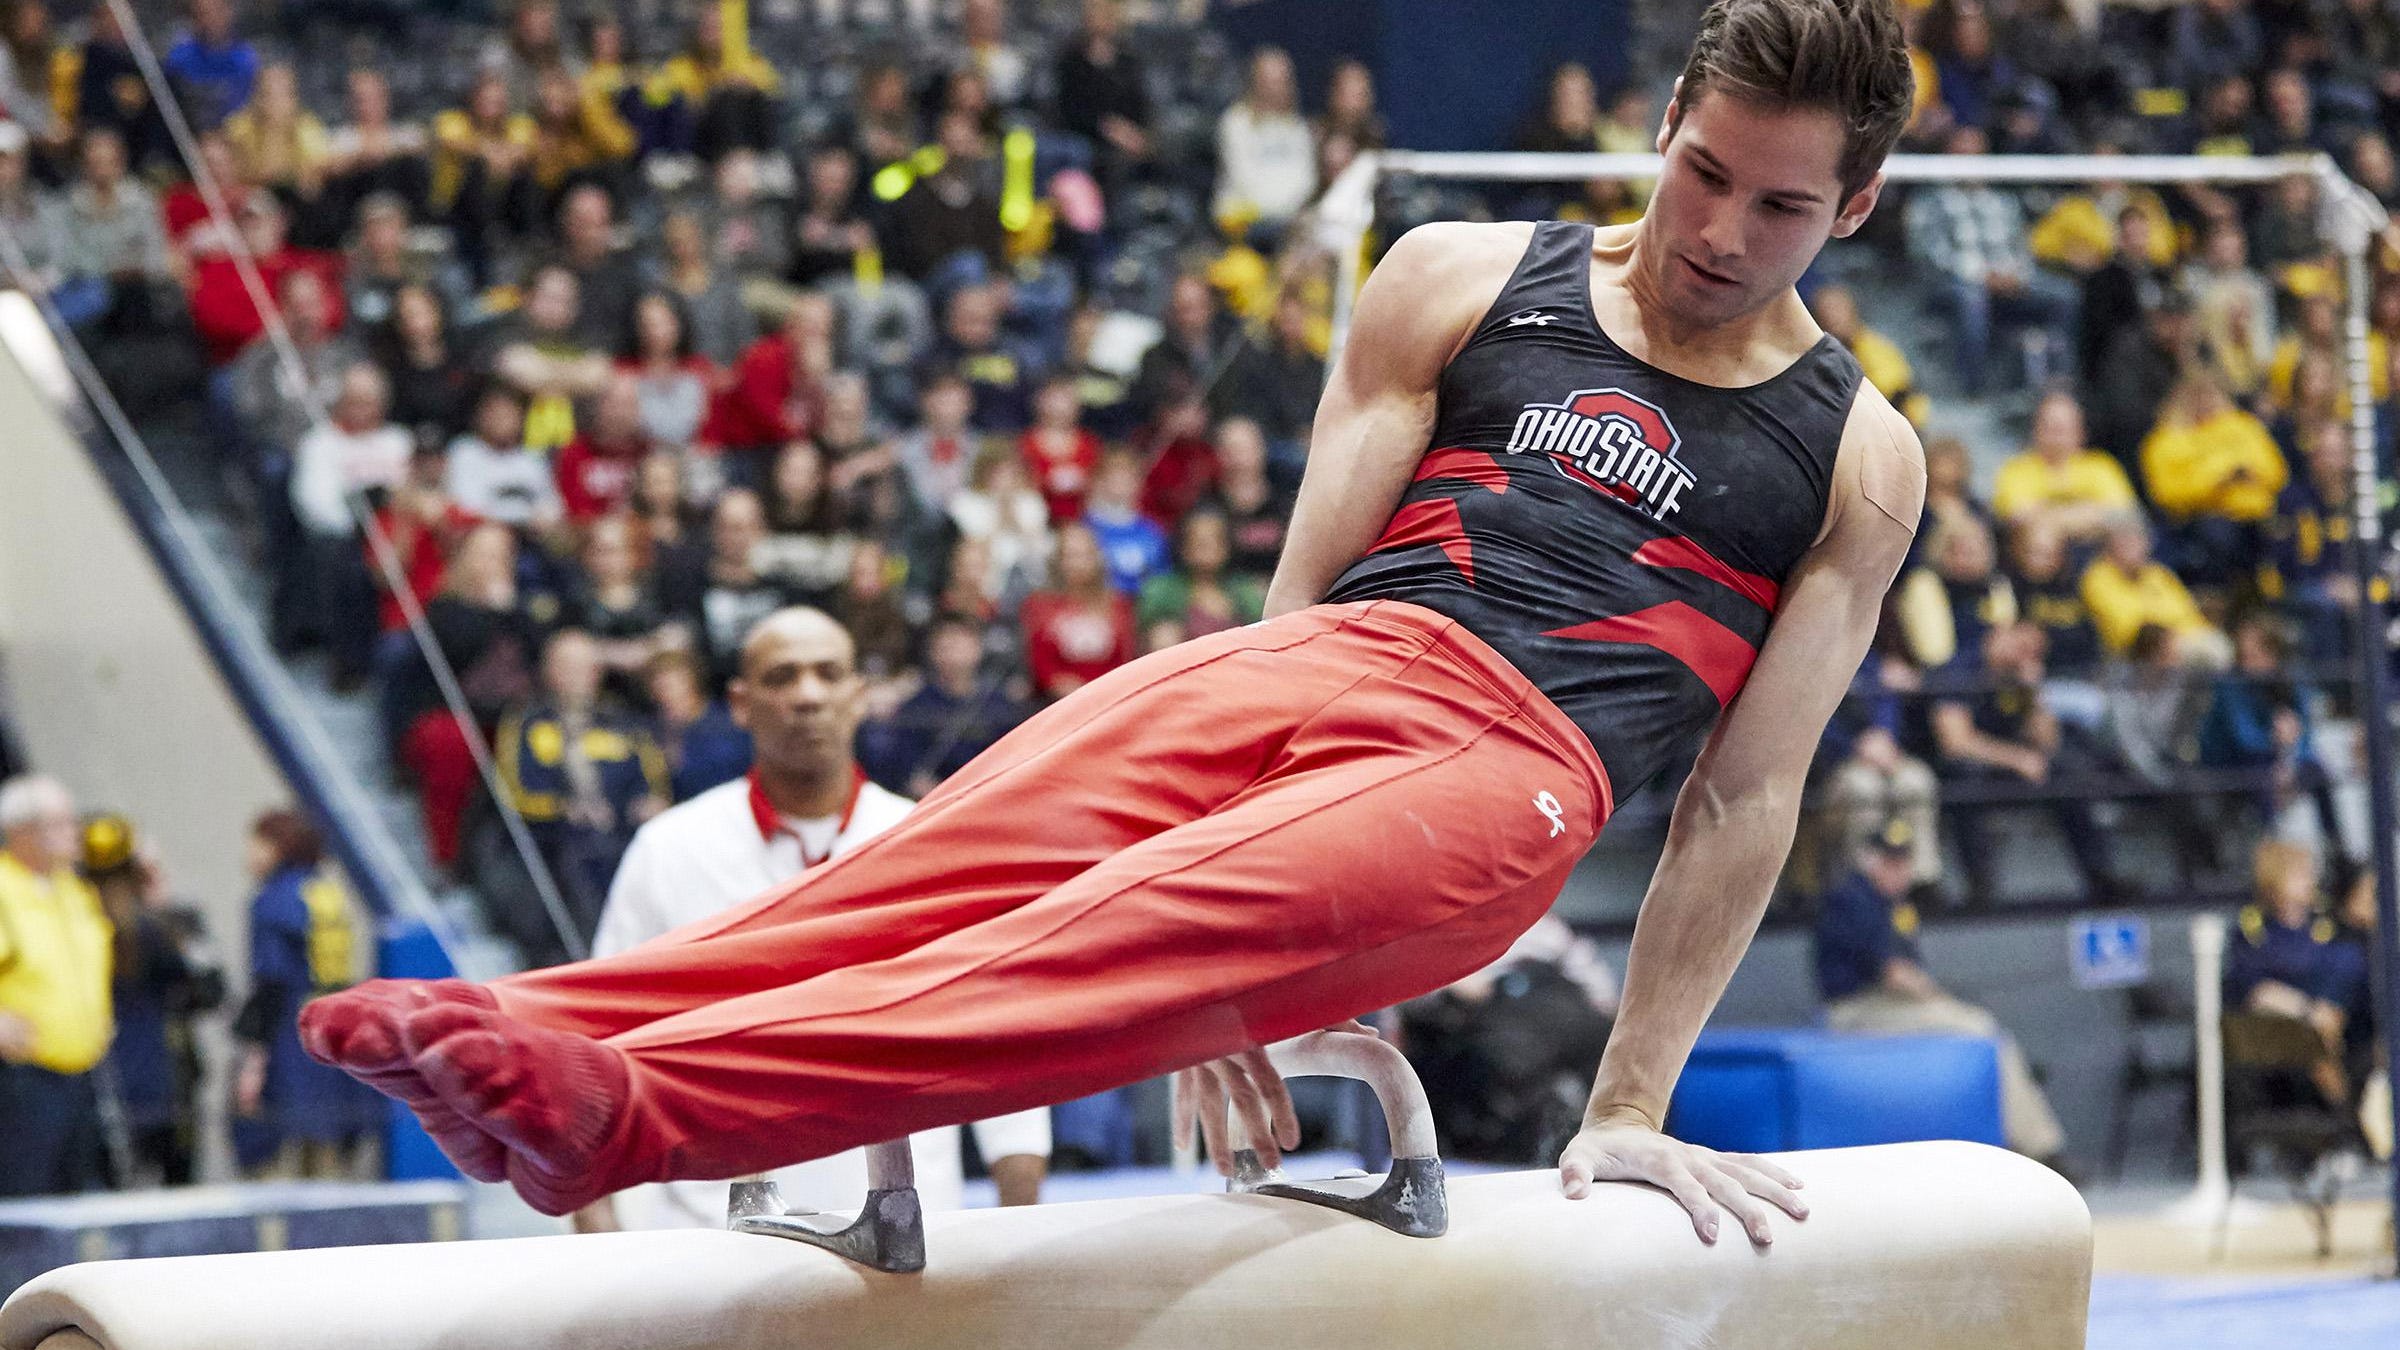 U S Olympic Trials Alec Yoder Aims For Spot On Men S Gymnastics Team